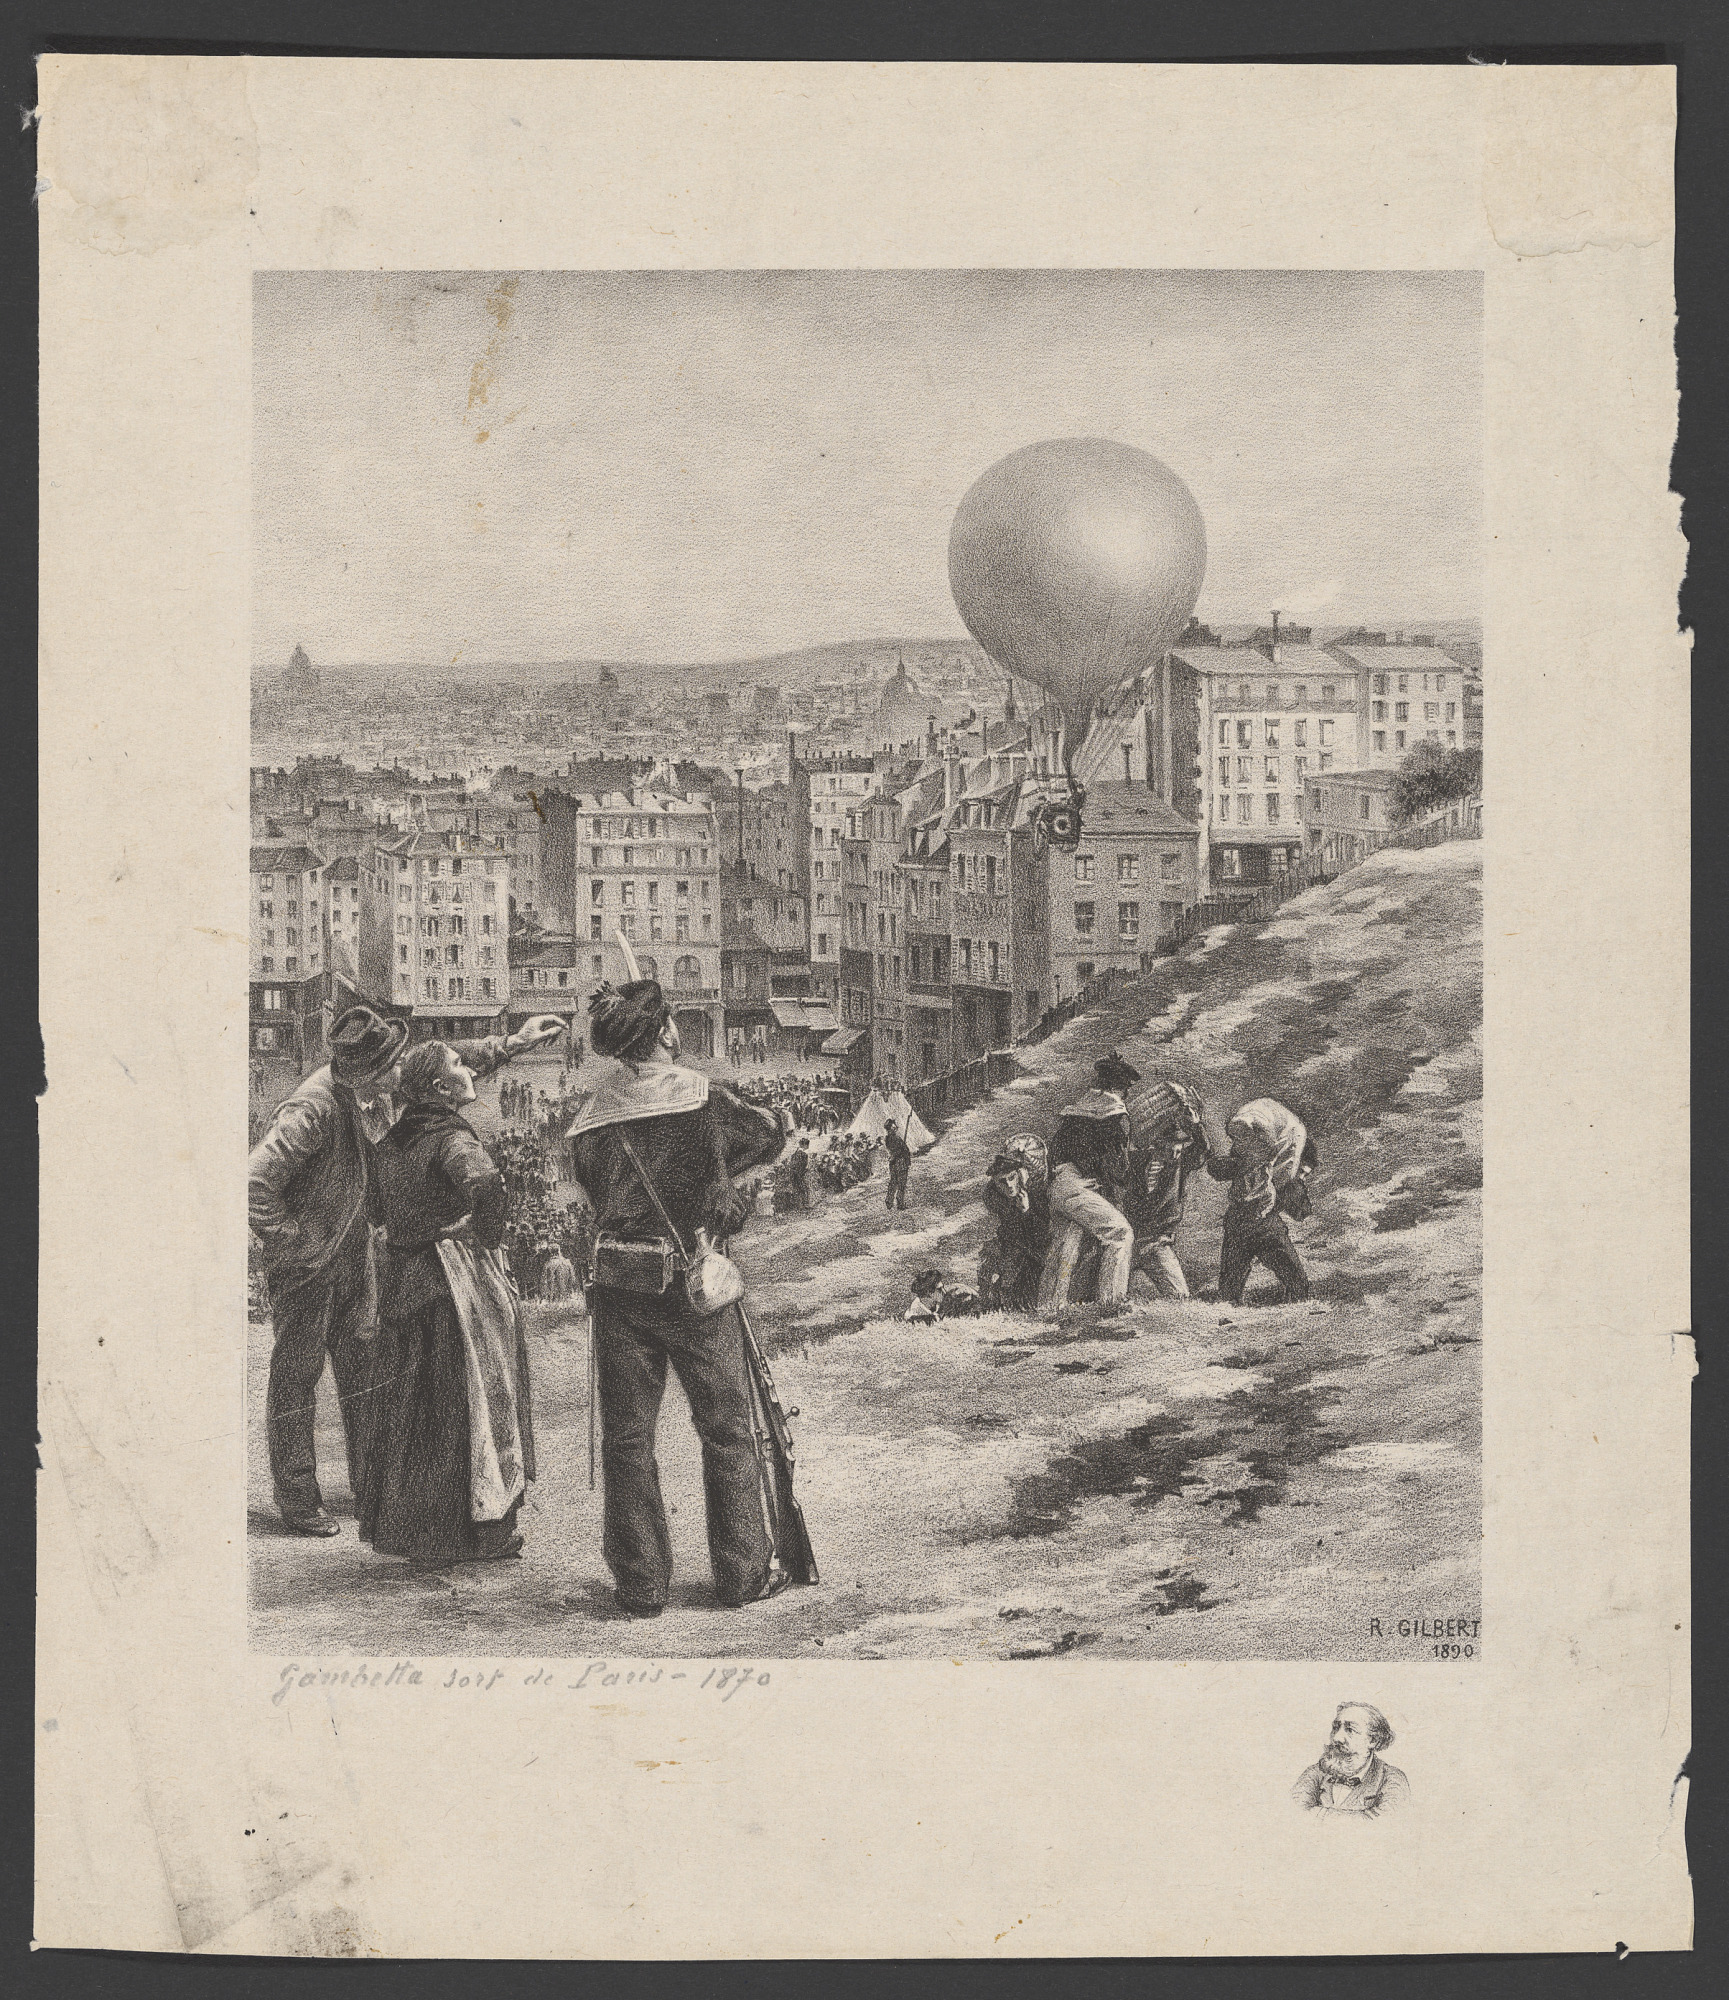 A balloon rises above besieged Paris. Three figures in the left foreground watch its progress. There is a small portrait of a bearded man in the picture's border lower right.